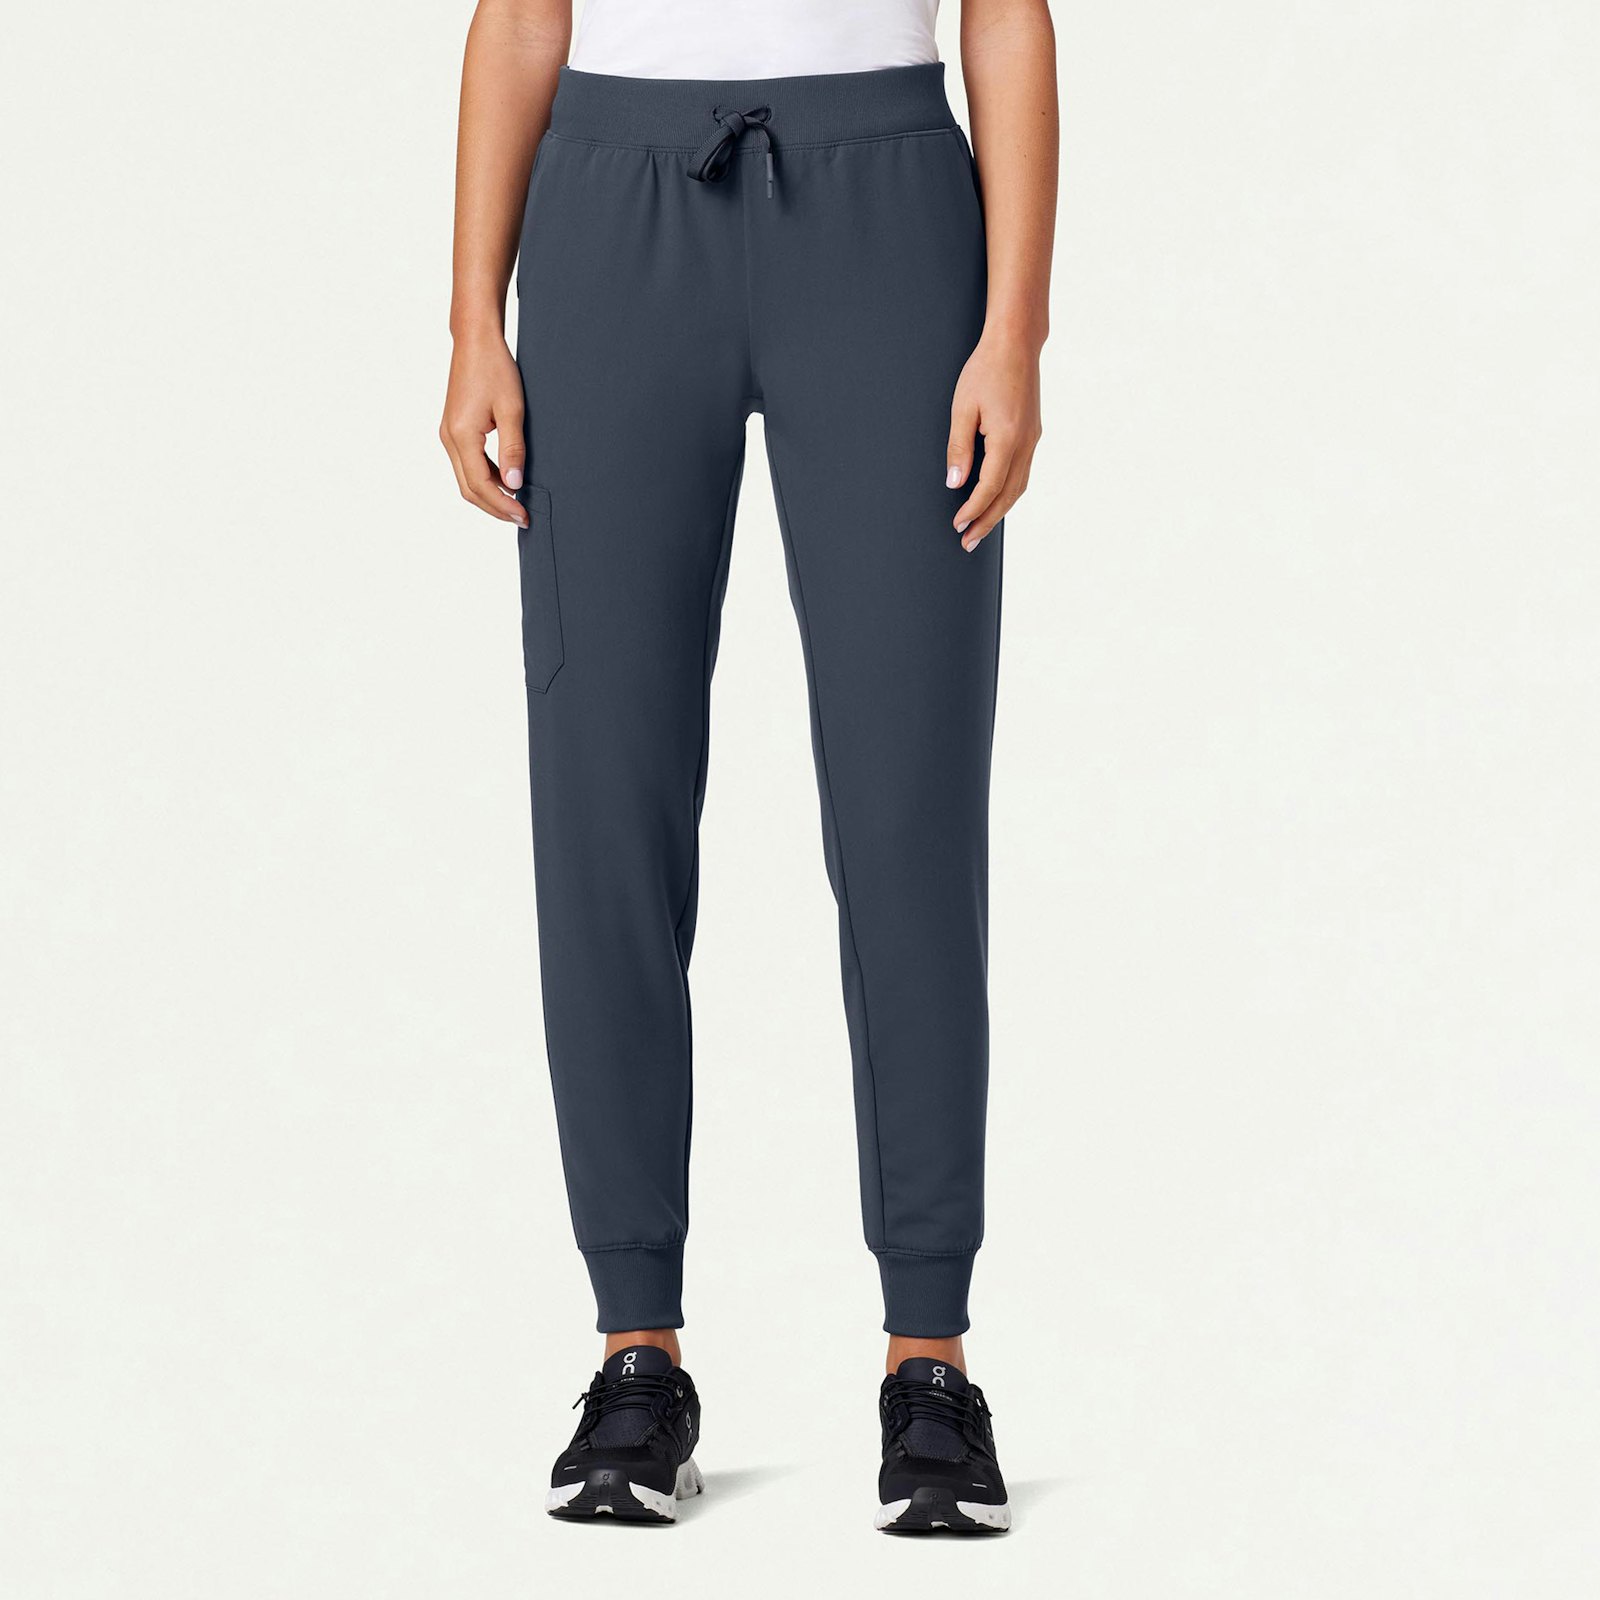 Athletic Works Woman's Soft Jogger Pants